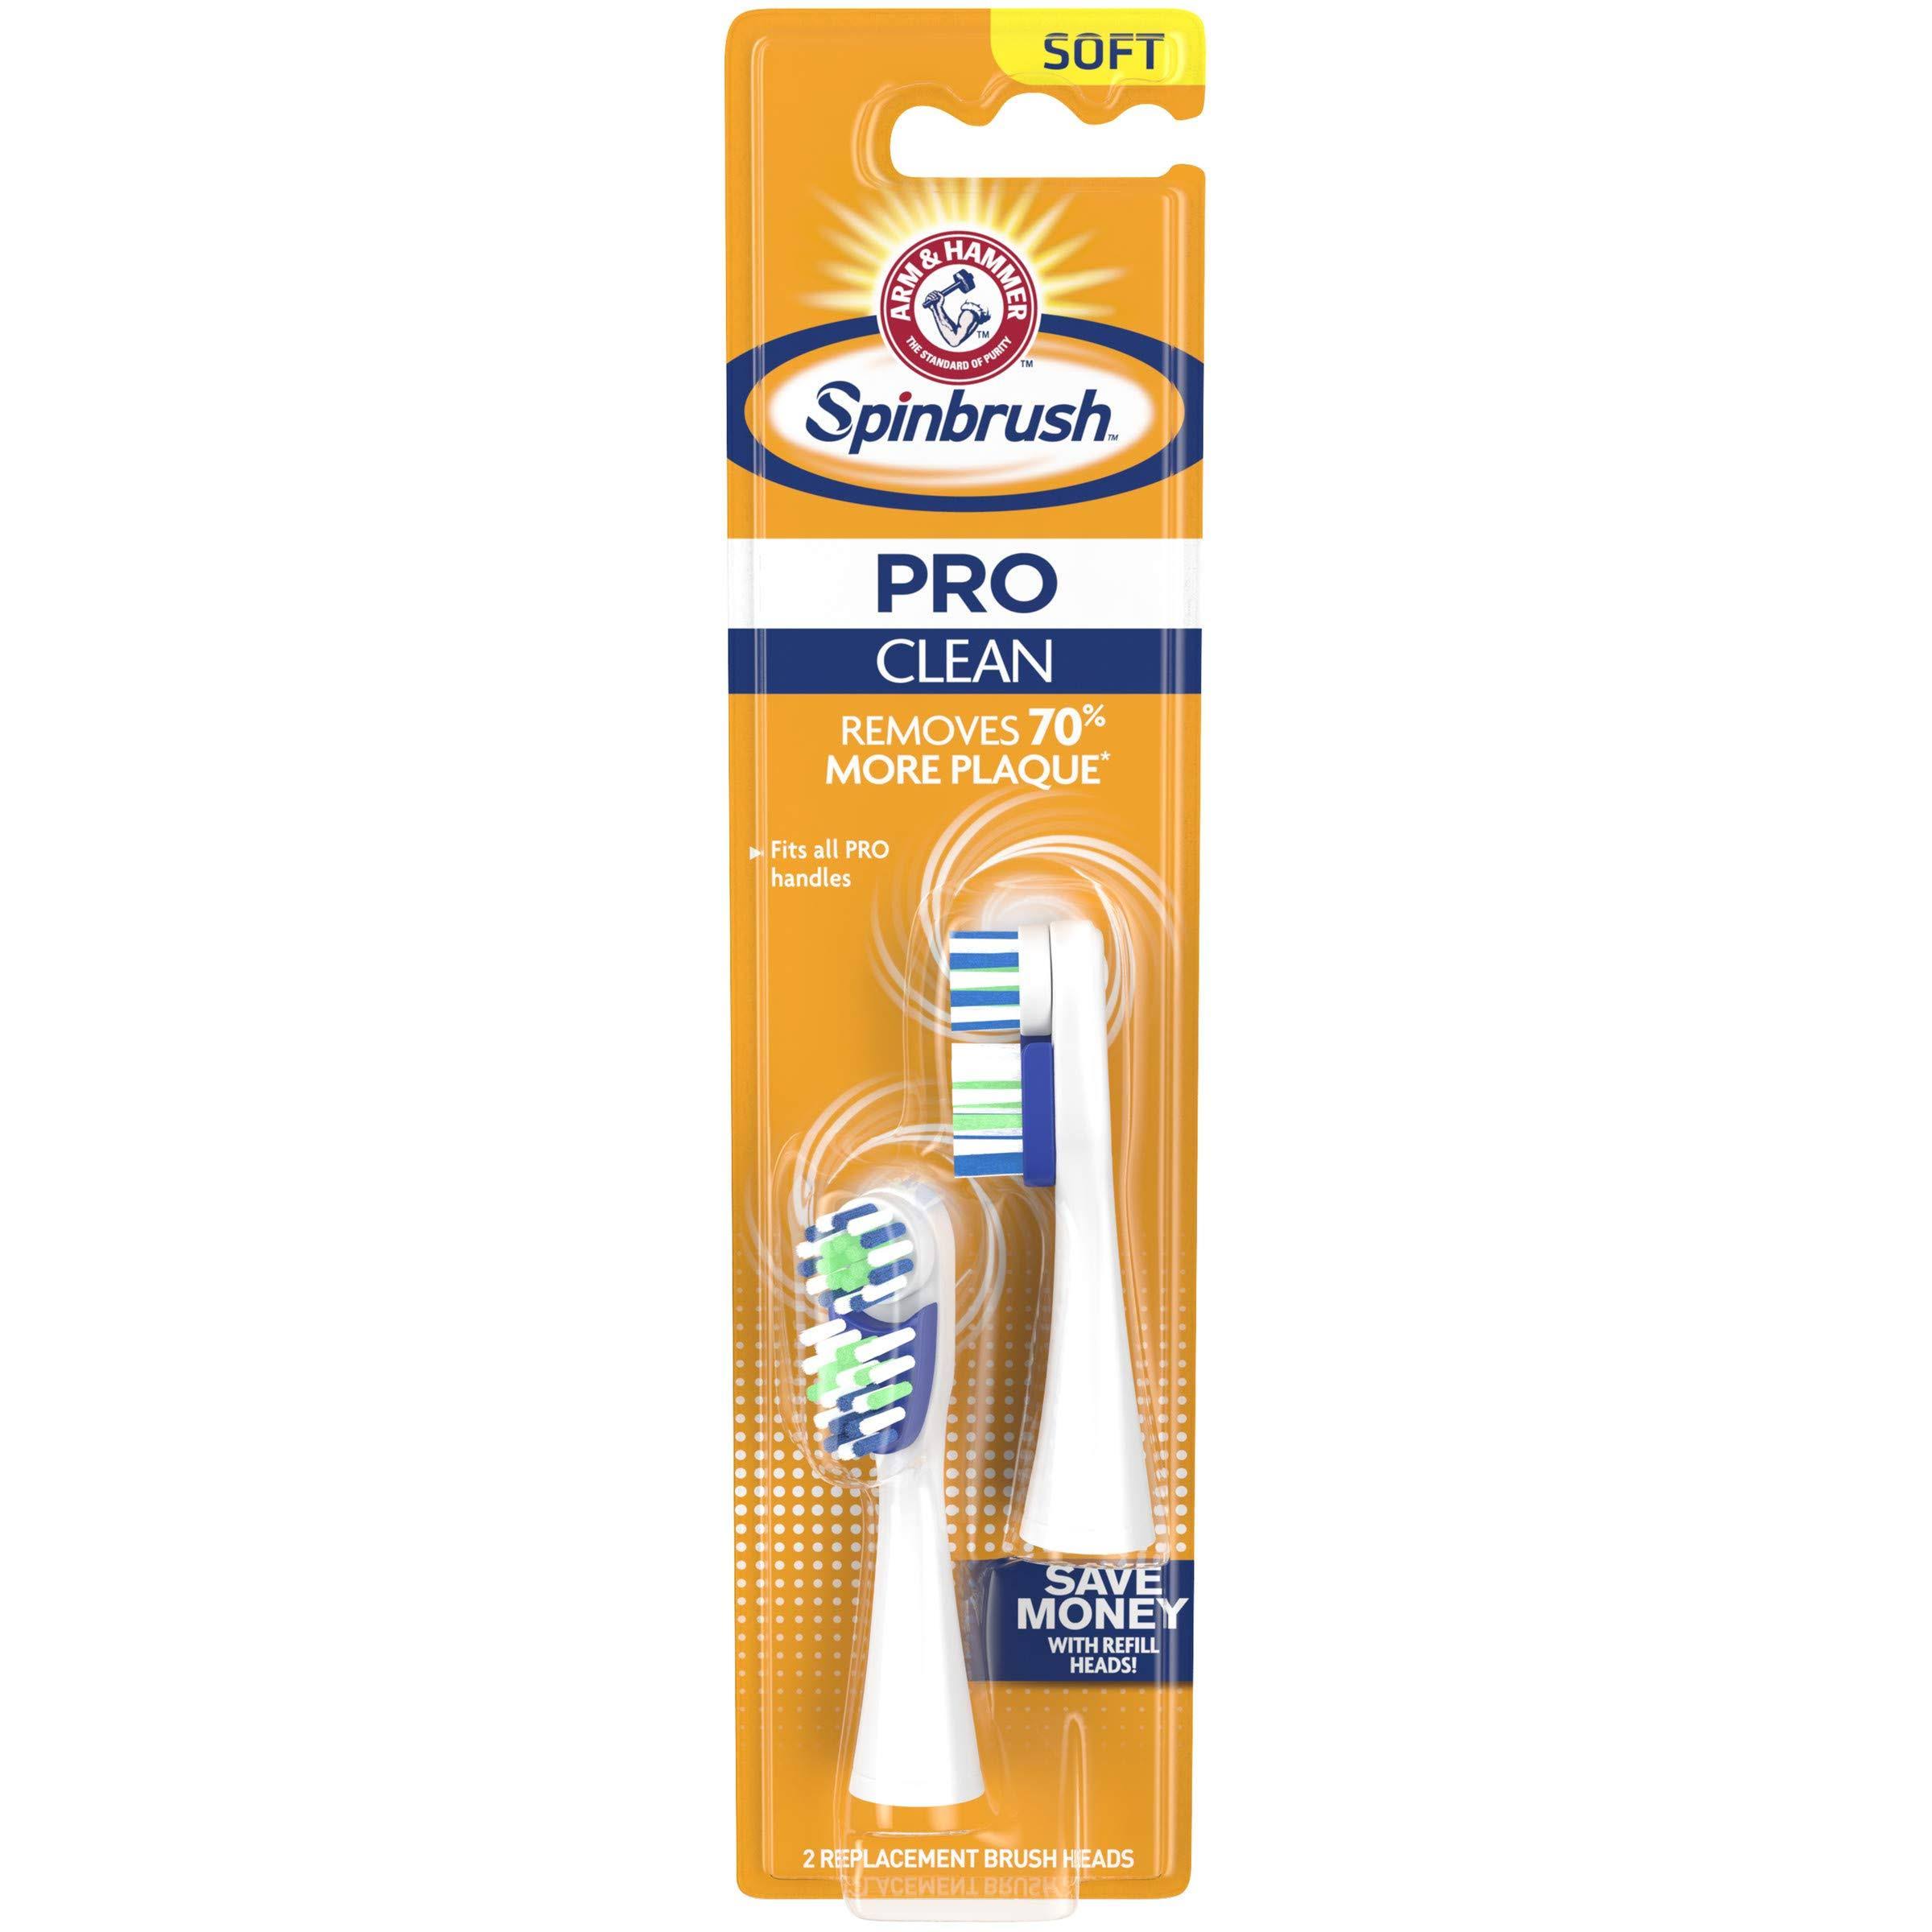 Spinbrush Pro Series Daily Clean Replacement Brush Heads - 2pk, Soft